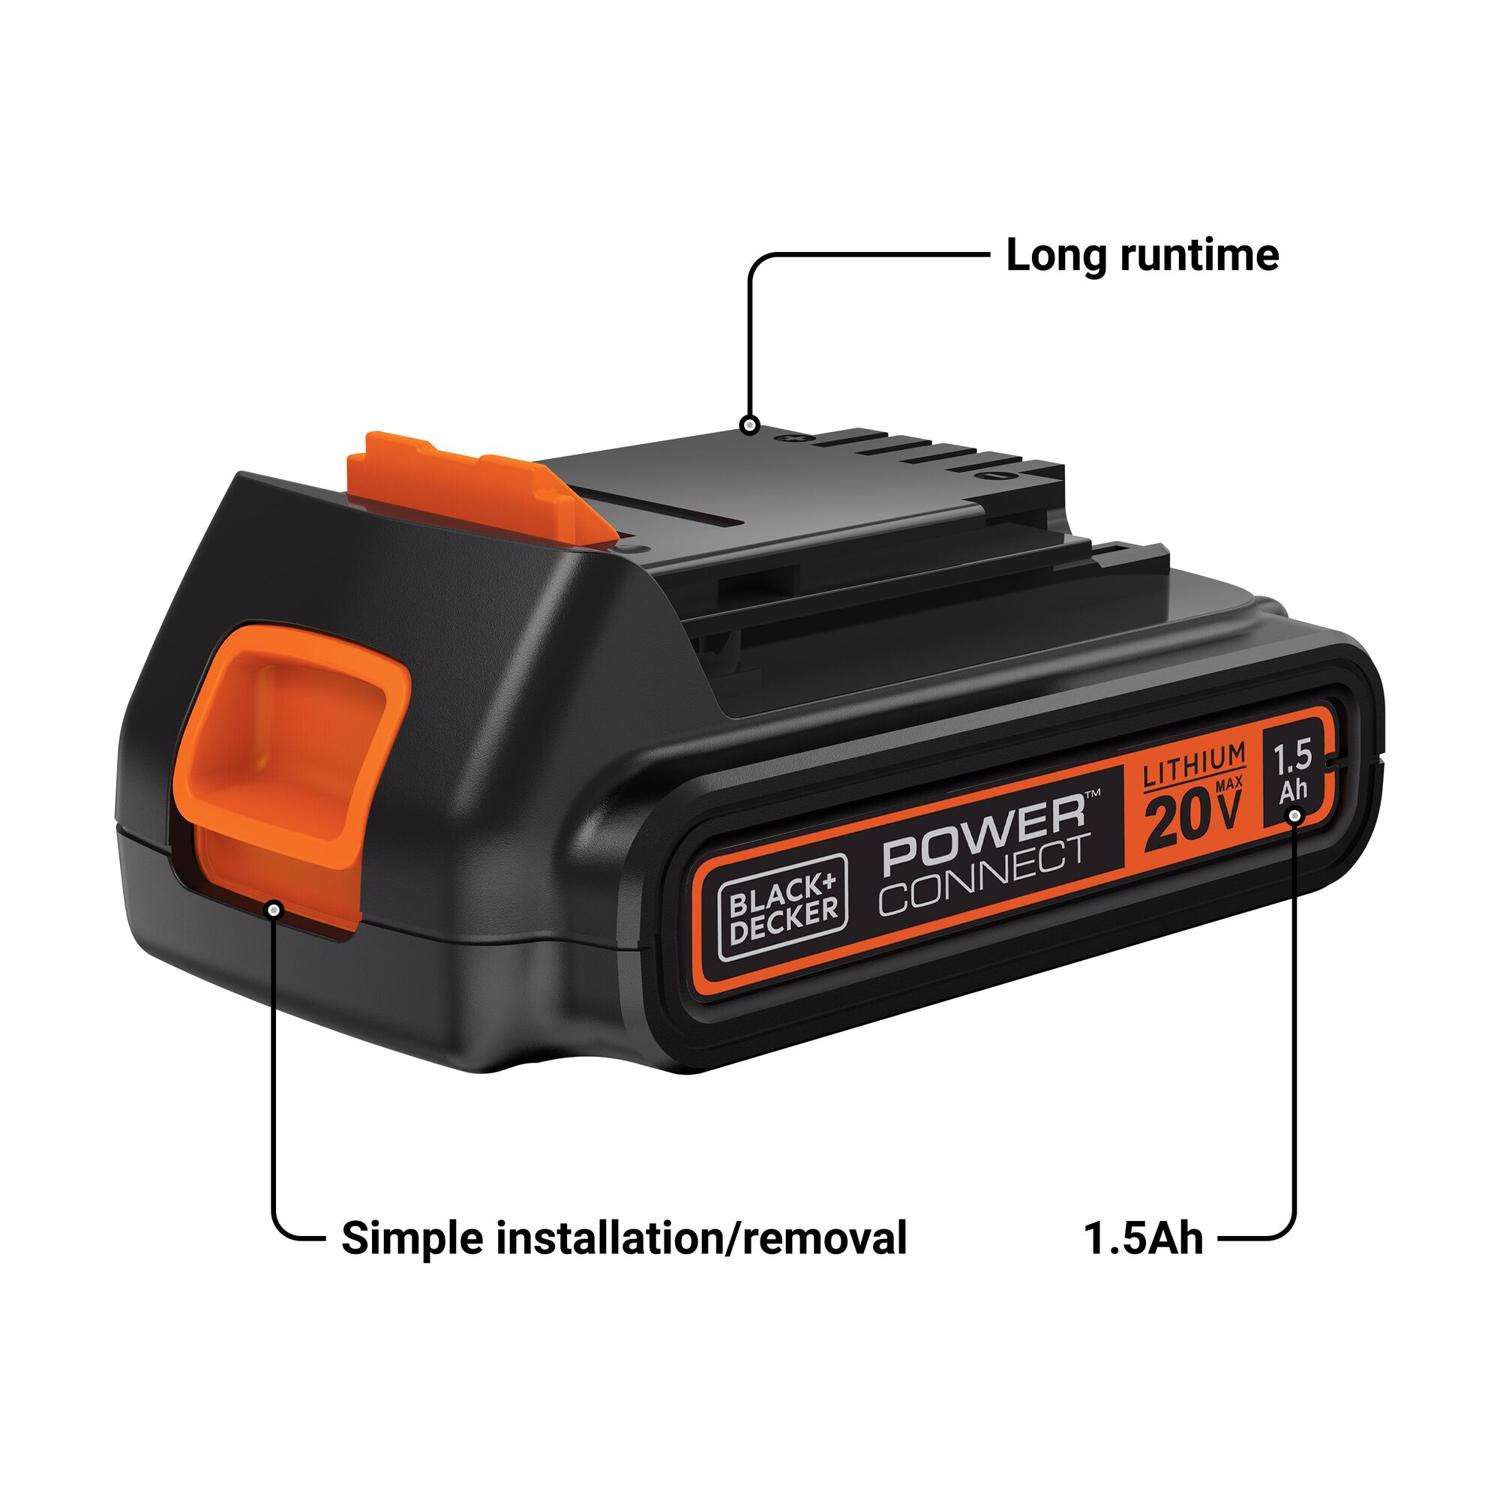 BLACK+DECKER 20V MAX* 4 Tool Combo Kit with (2) 1.5 Ah Lithium Ion